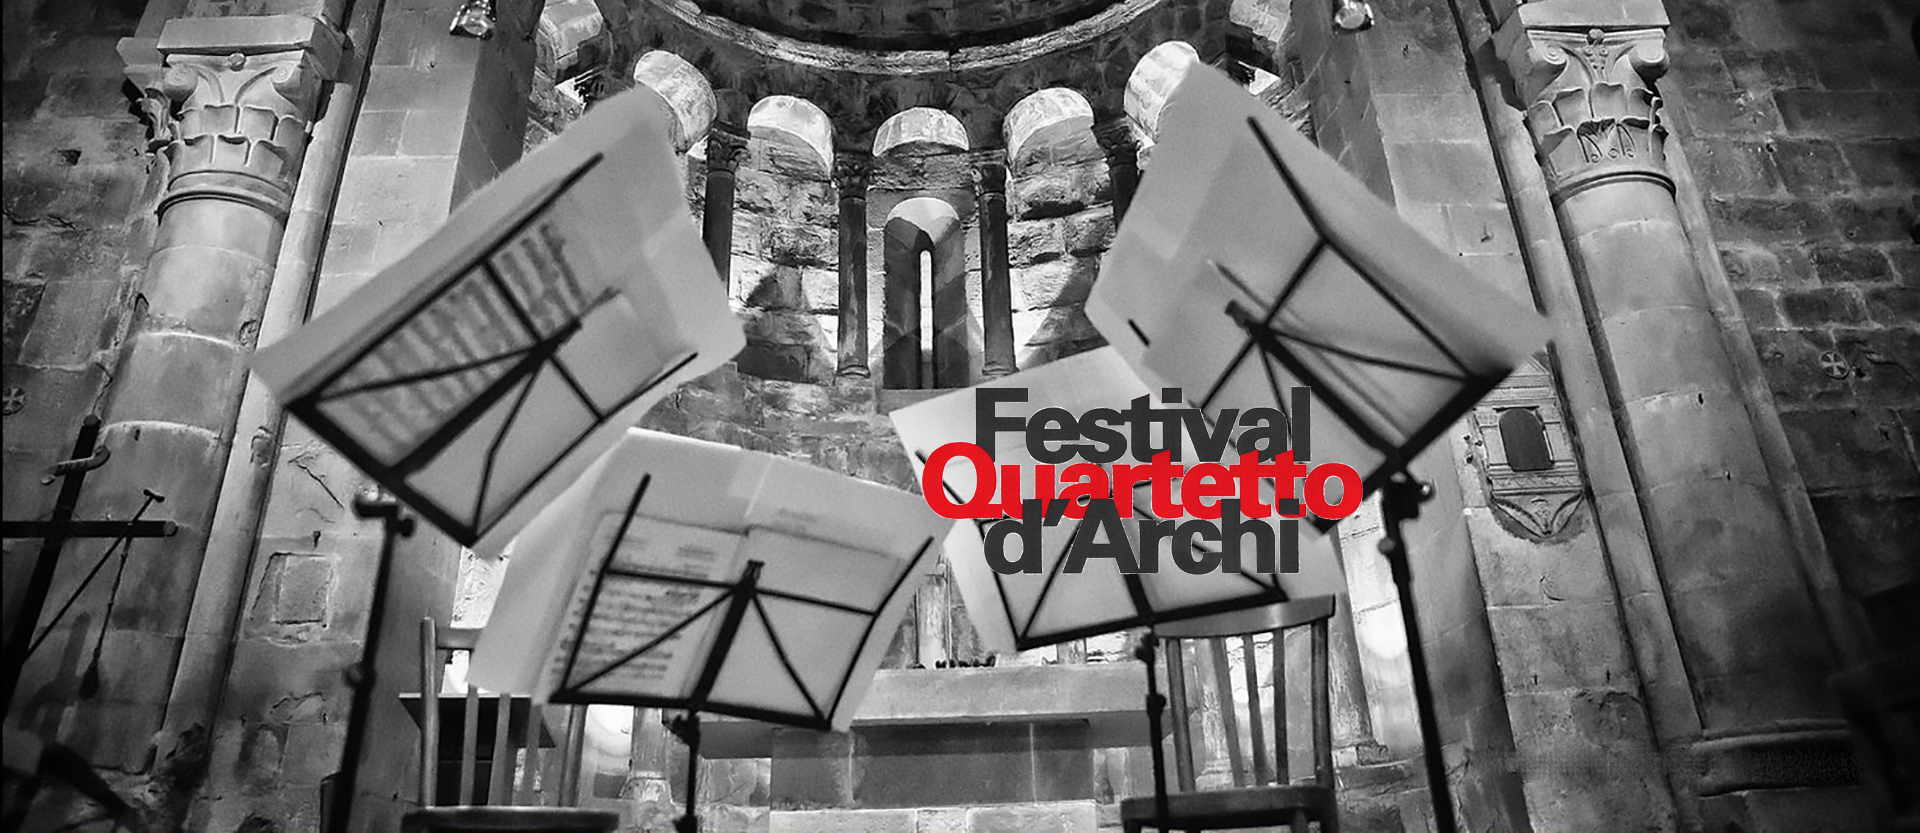 22nd String Quartet Festival at the Pieve of Gropina